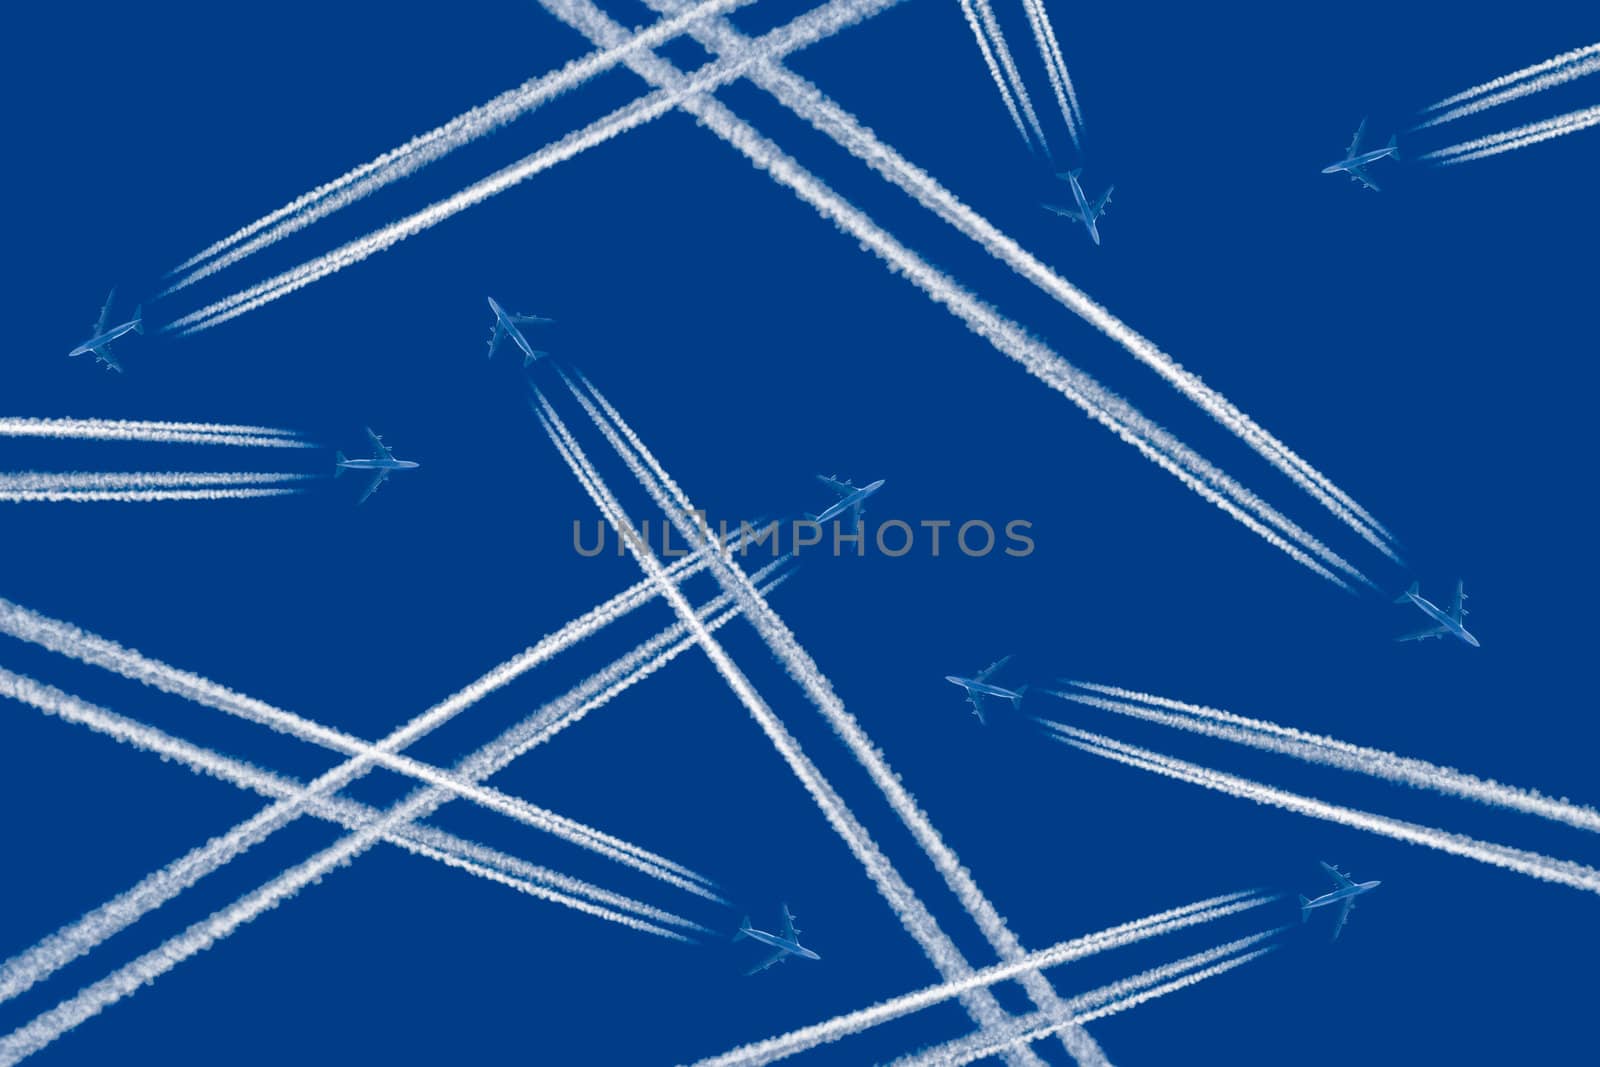 Heavy traffic: airliners criss-crossing the blue sky.